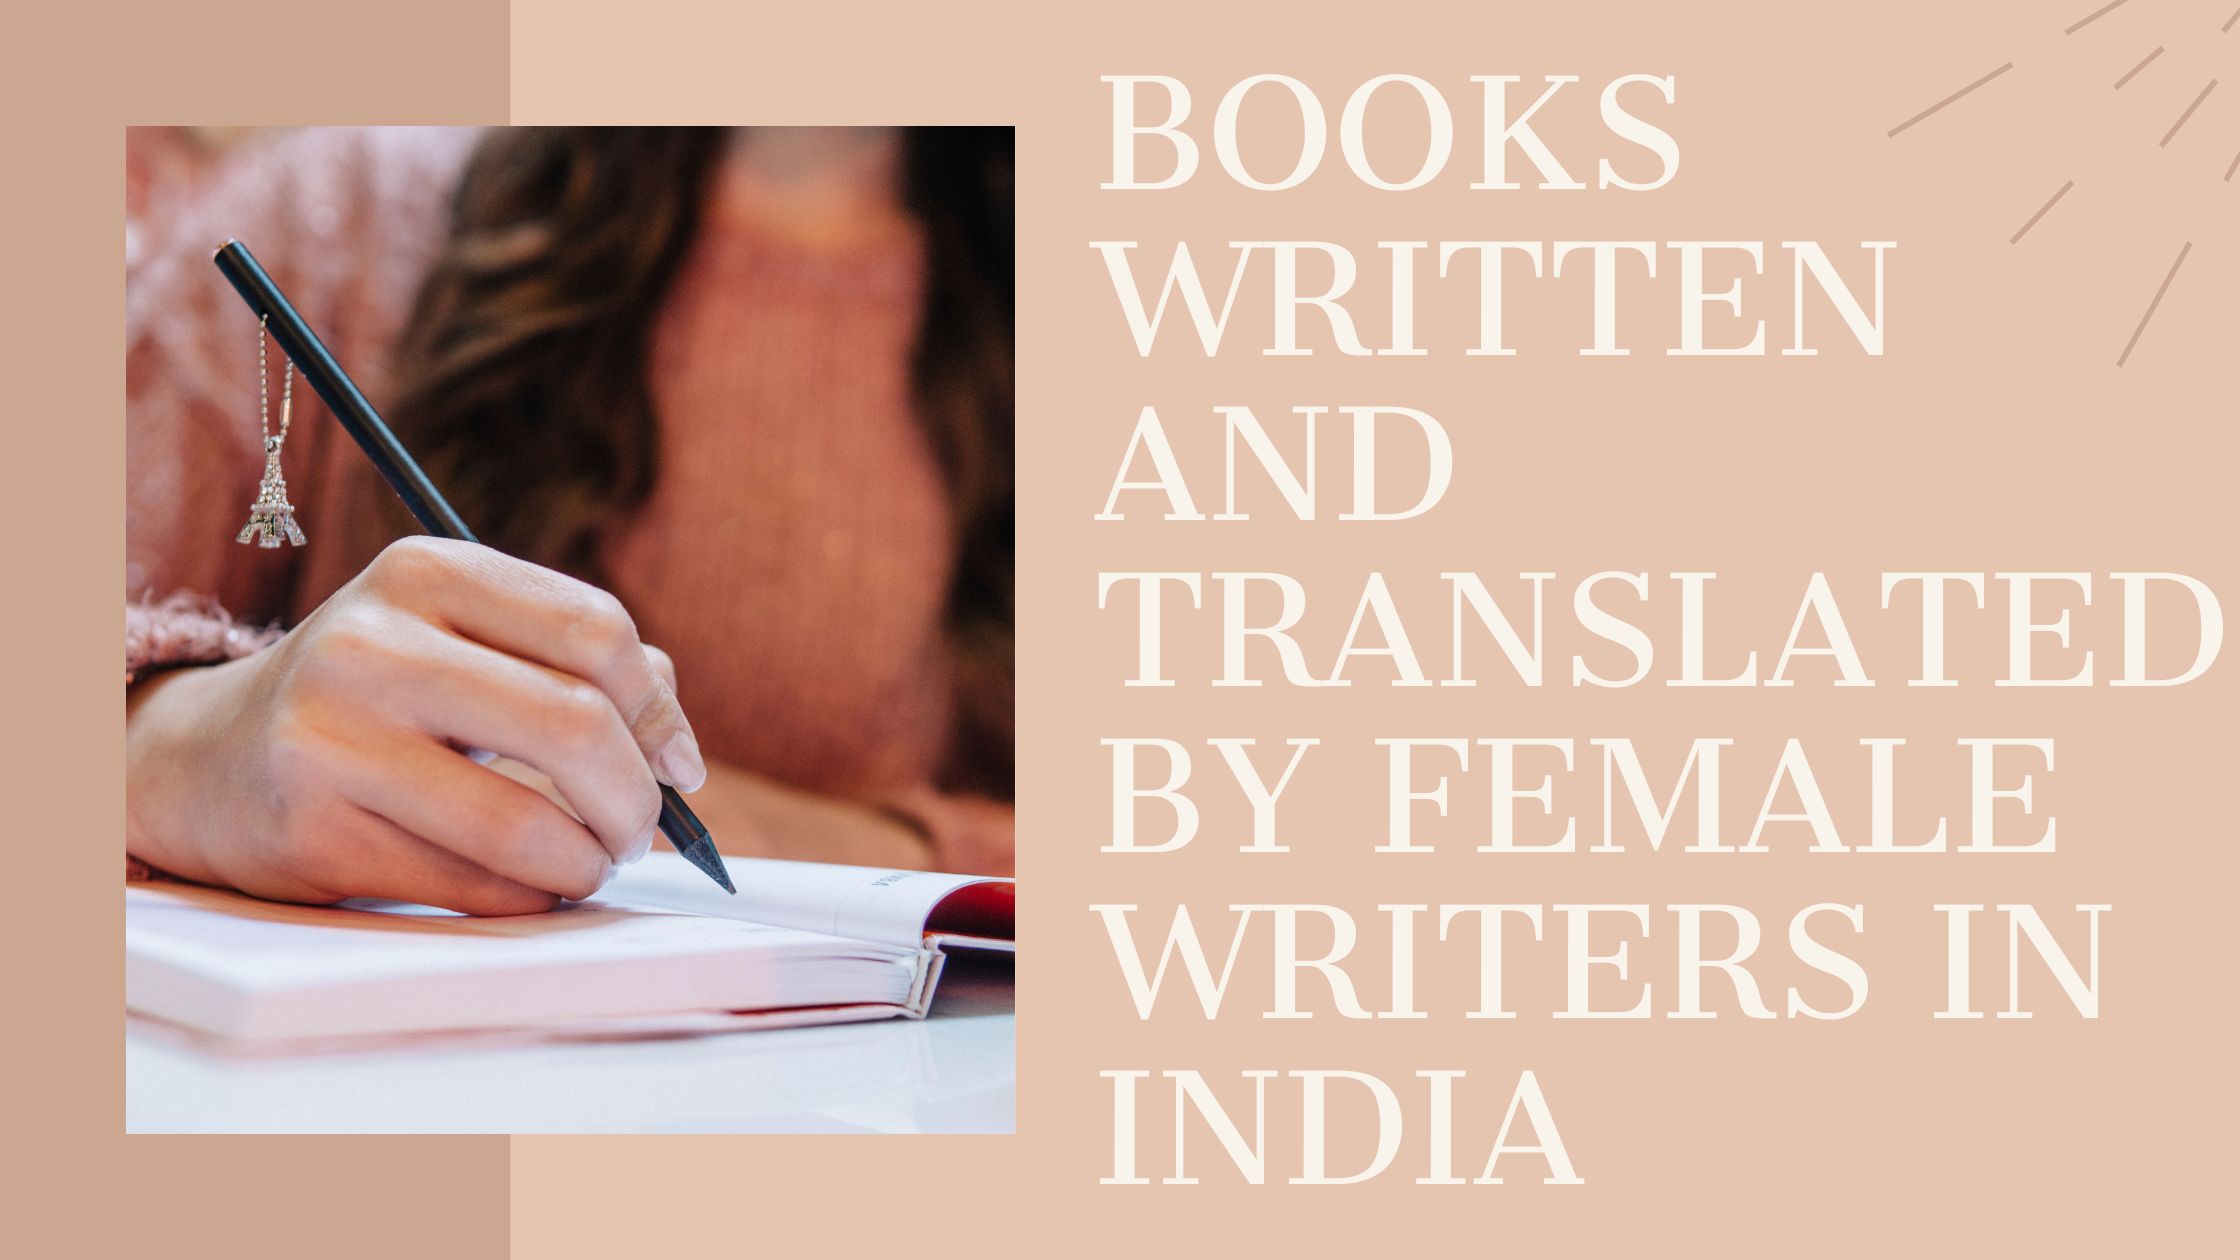 Books written and translated by female writers in India 